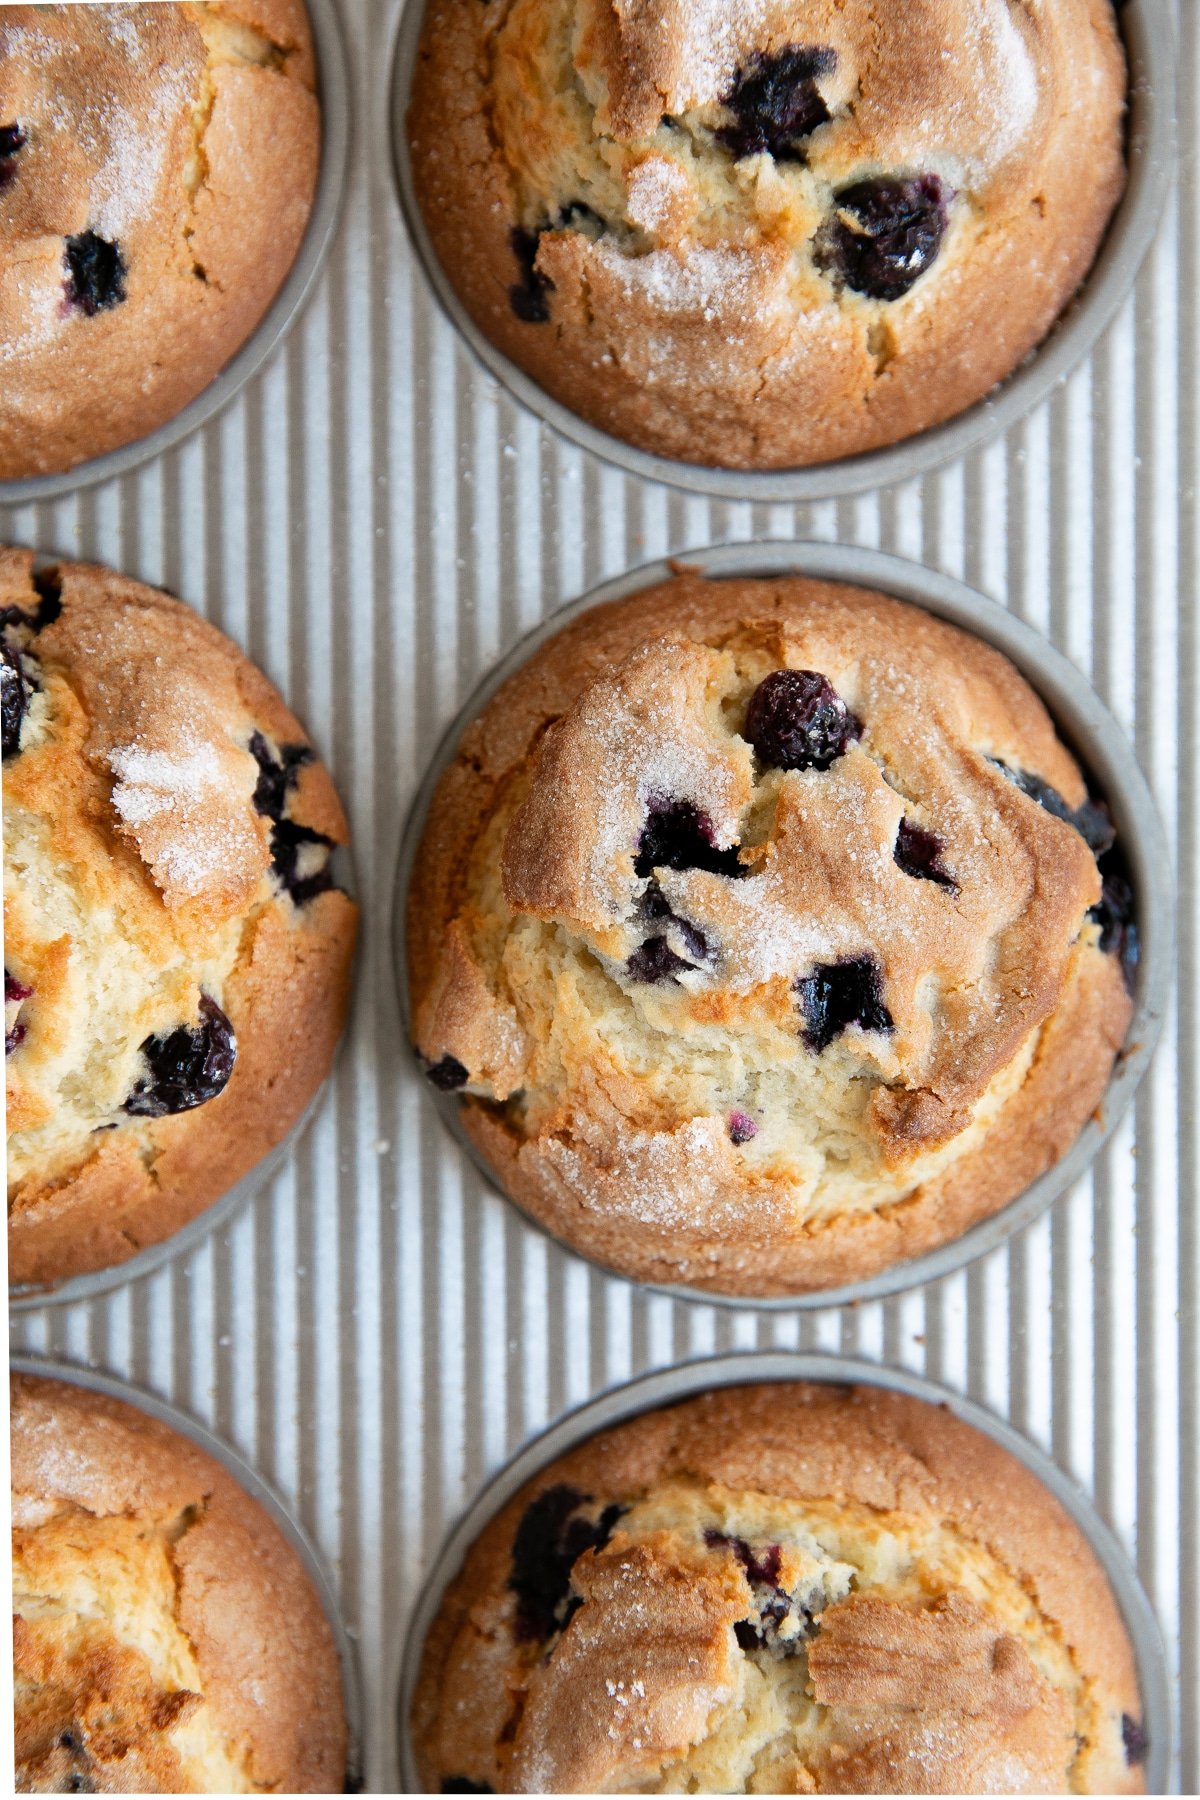 Easy Lemon Blueberry Muffins from a Cake Mix - Taste and Tell